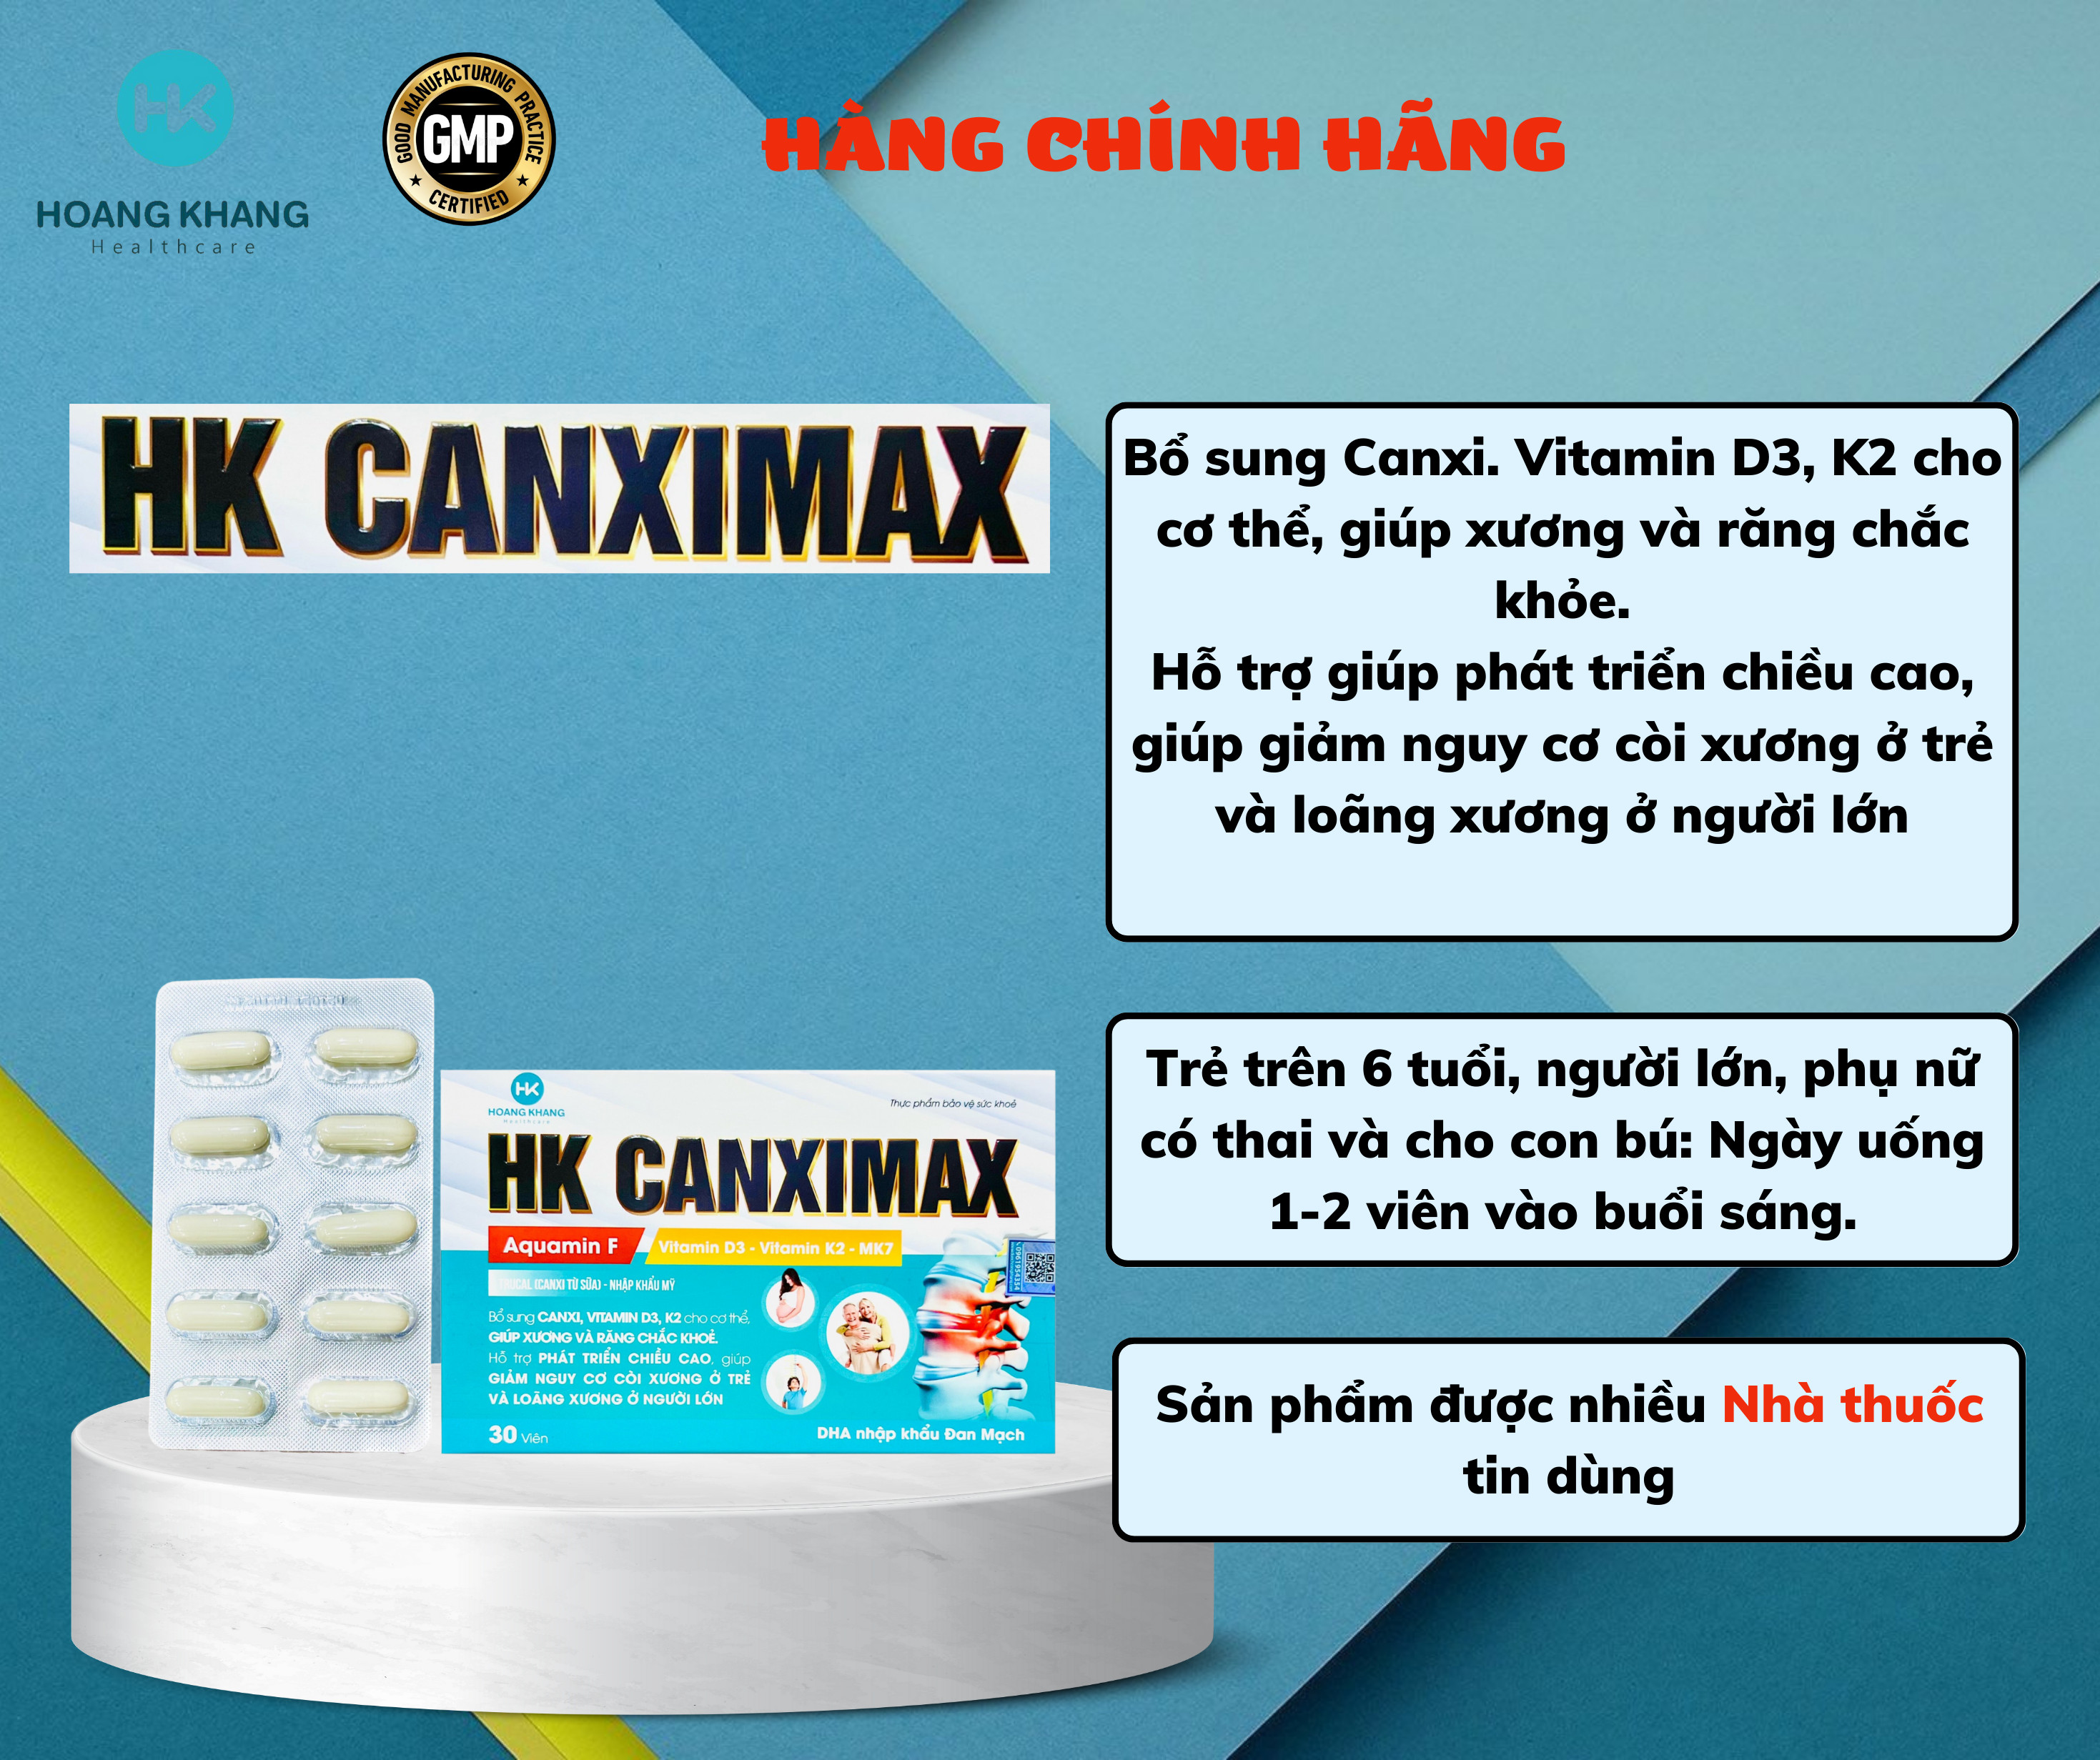 HK canximax adds calcium for strong bone strength